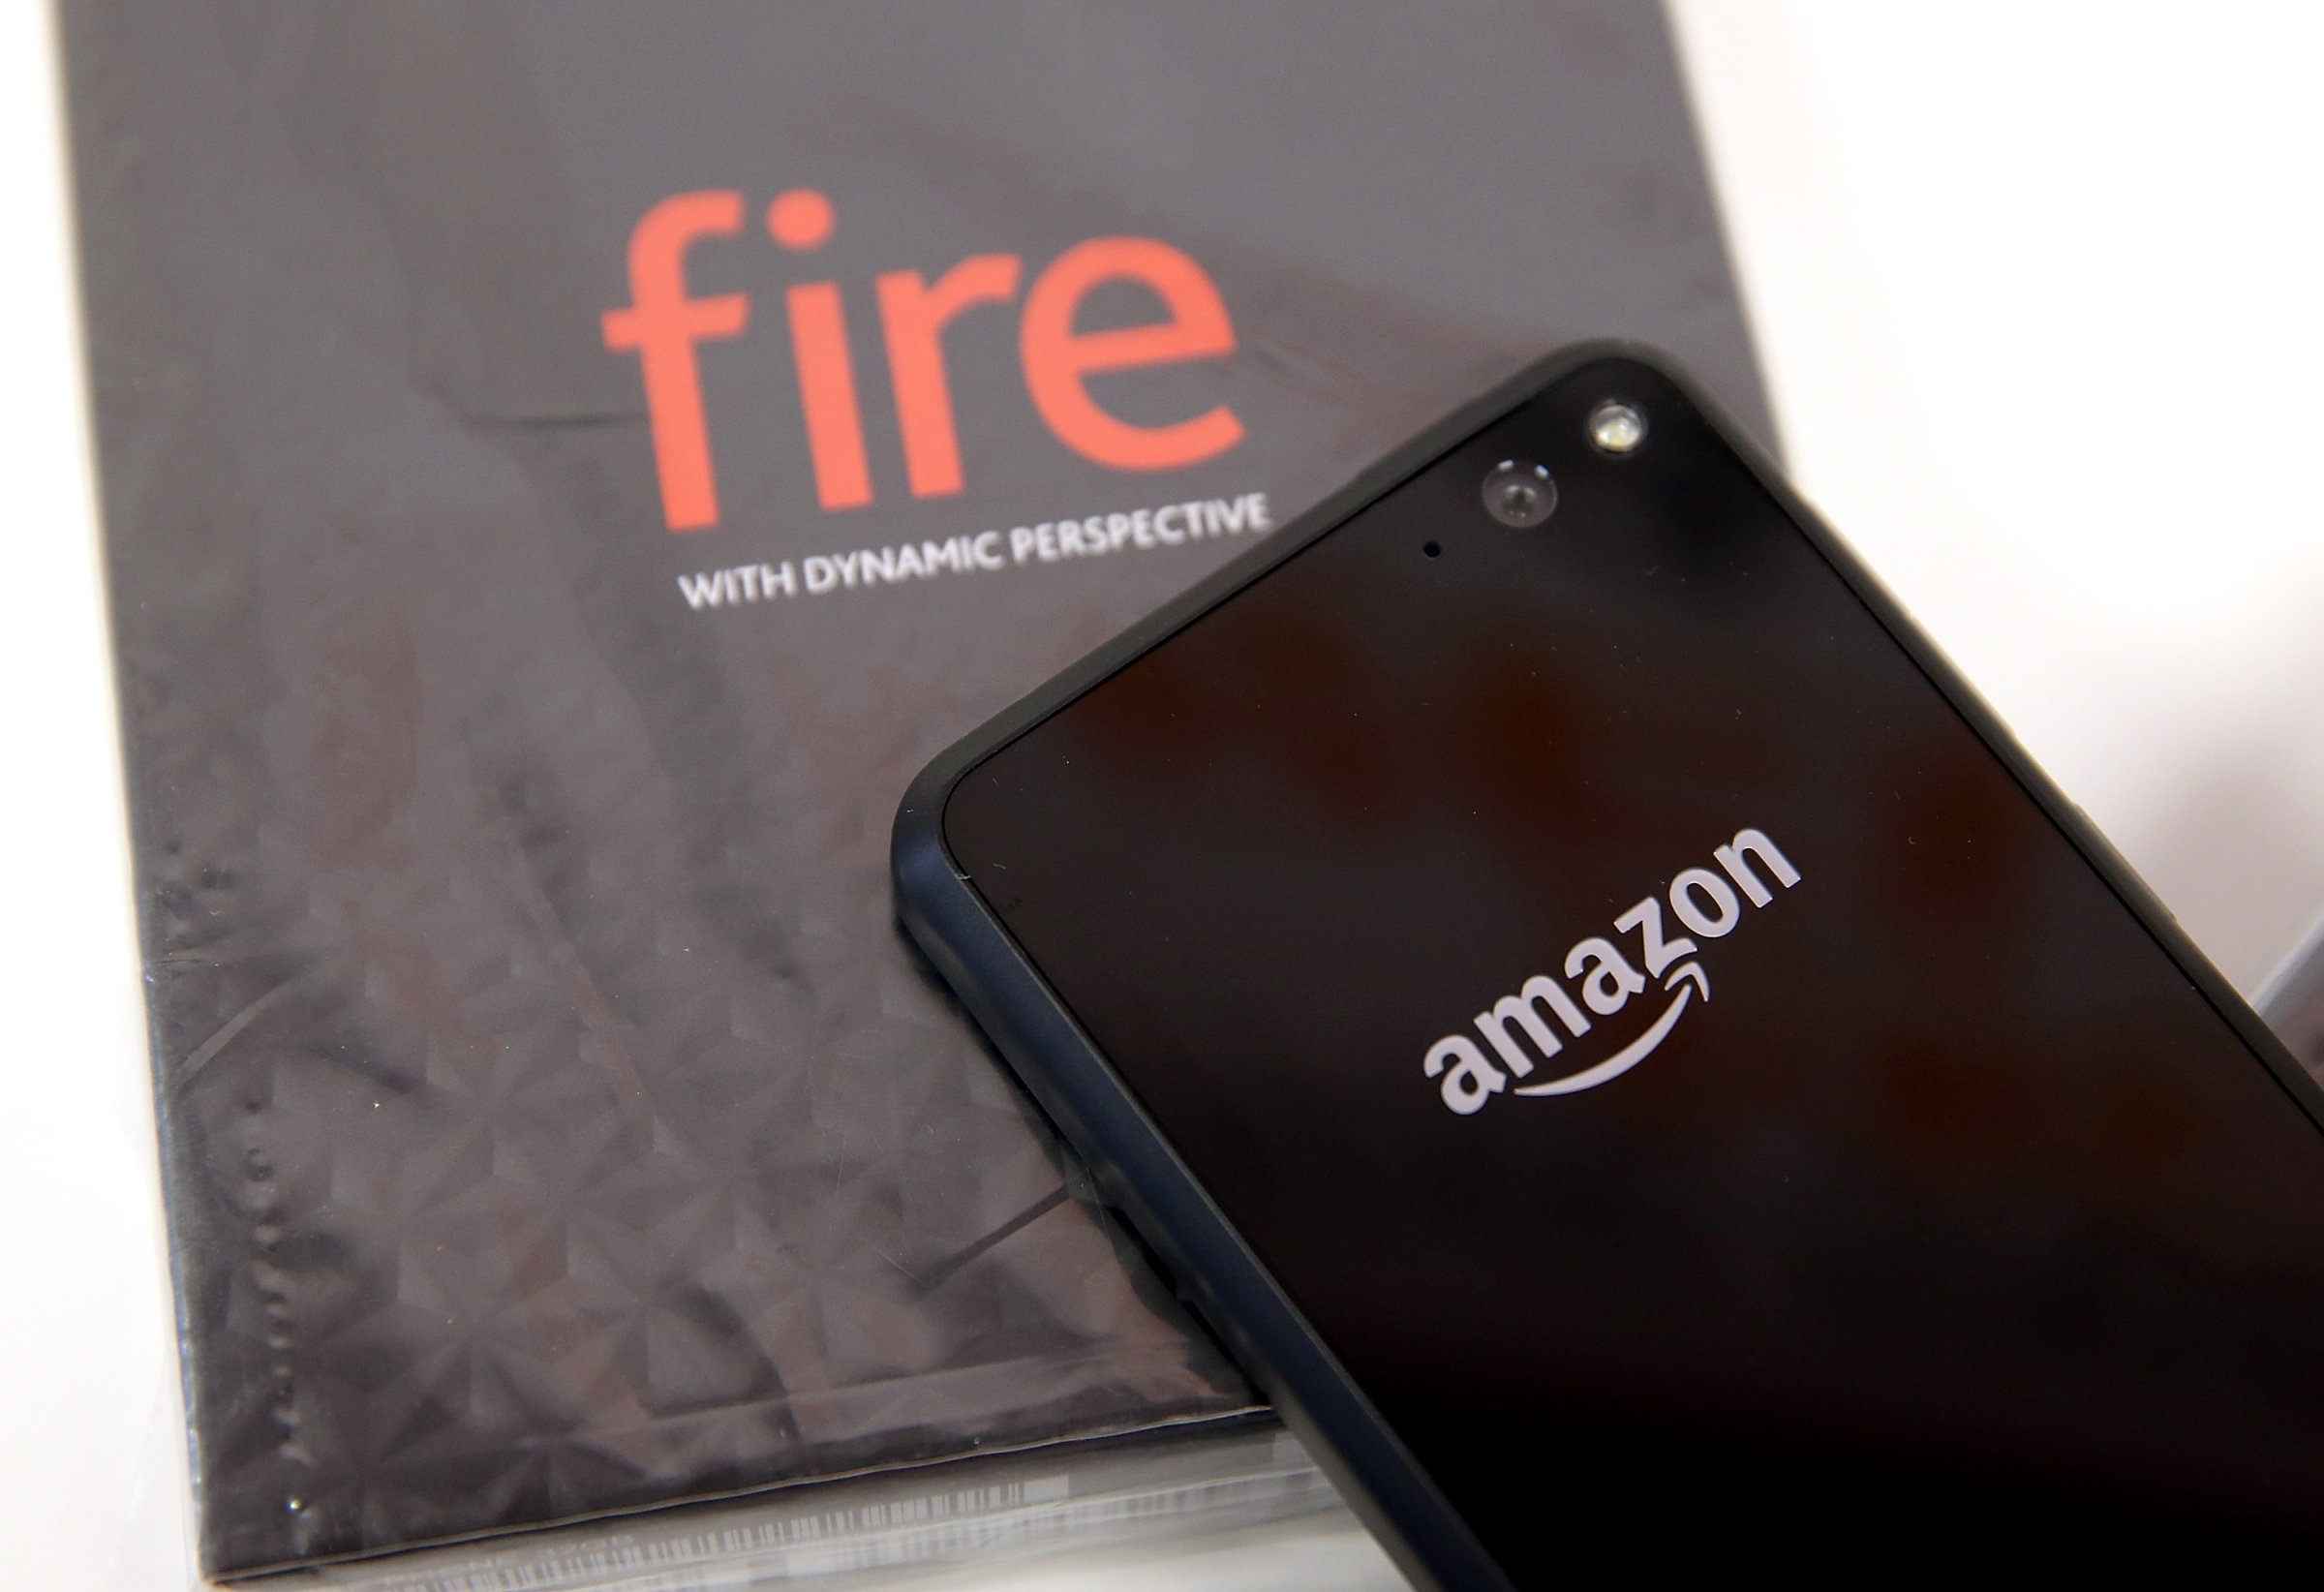 The Amazon Fire phone is displayed at an AT&T store on July 25, 2014 in San Francisco, California.